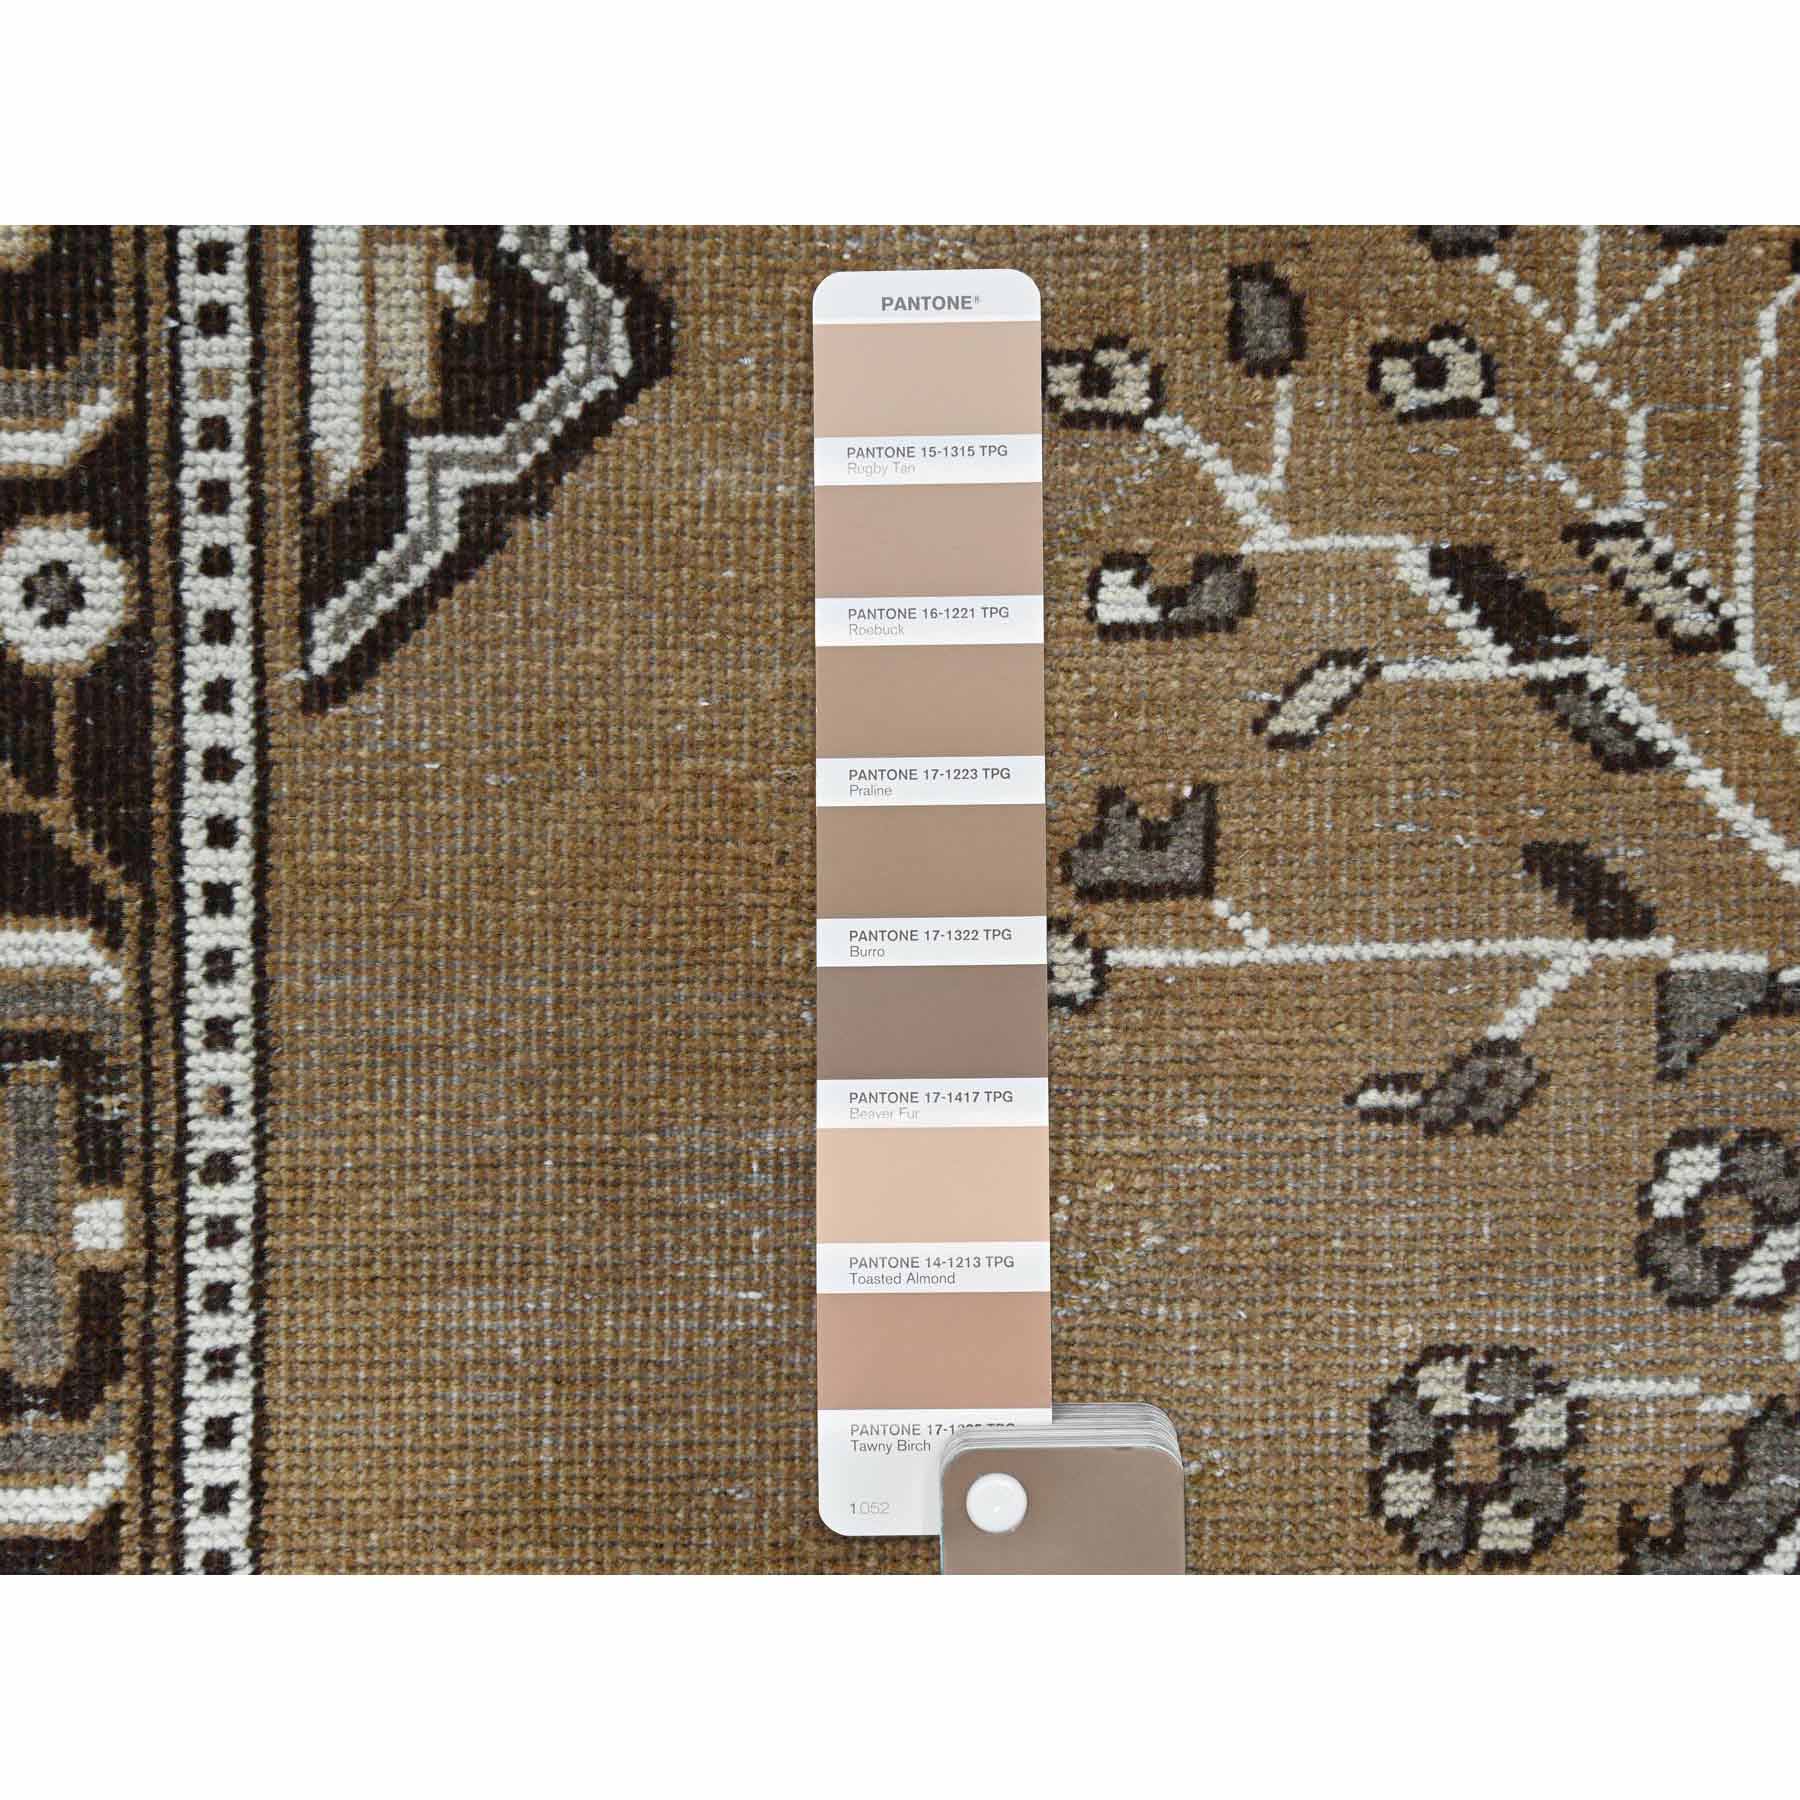 Overdyed-Vintage-Hand-Knotted-Rug-405105